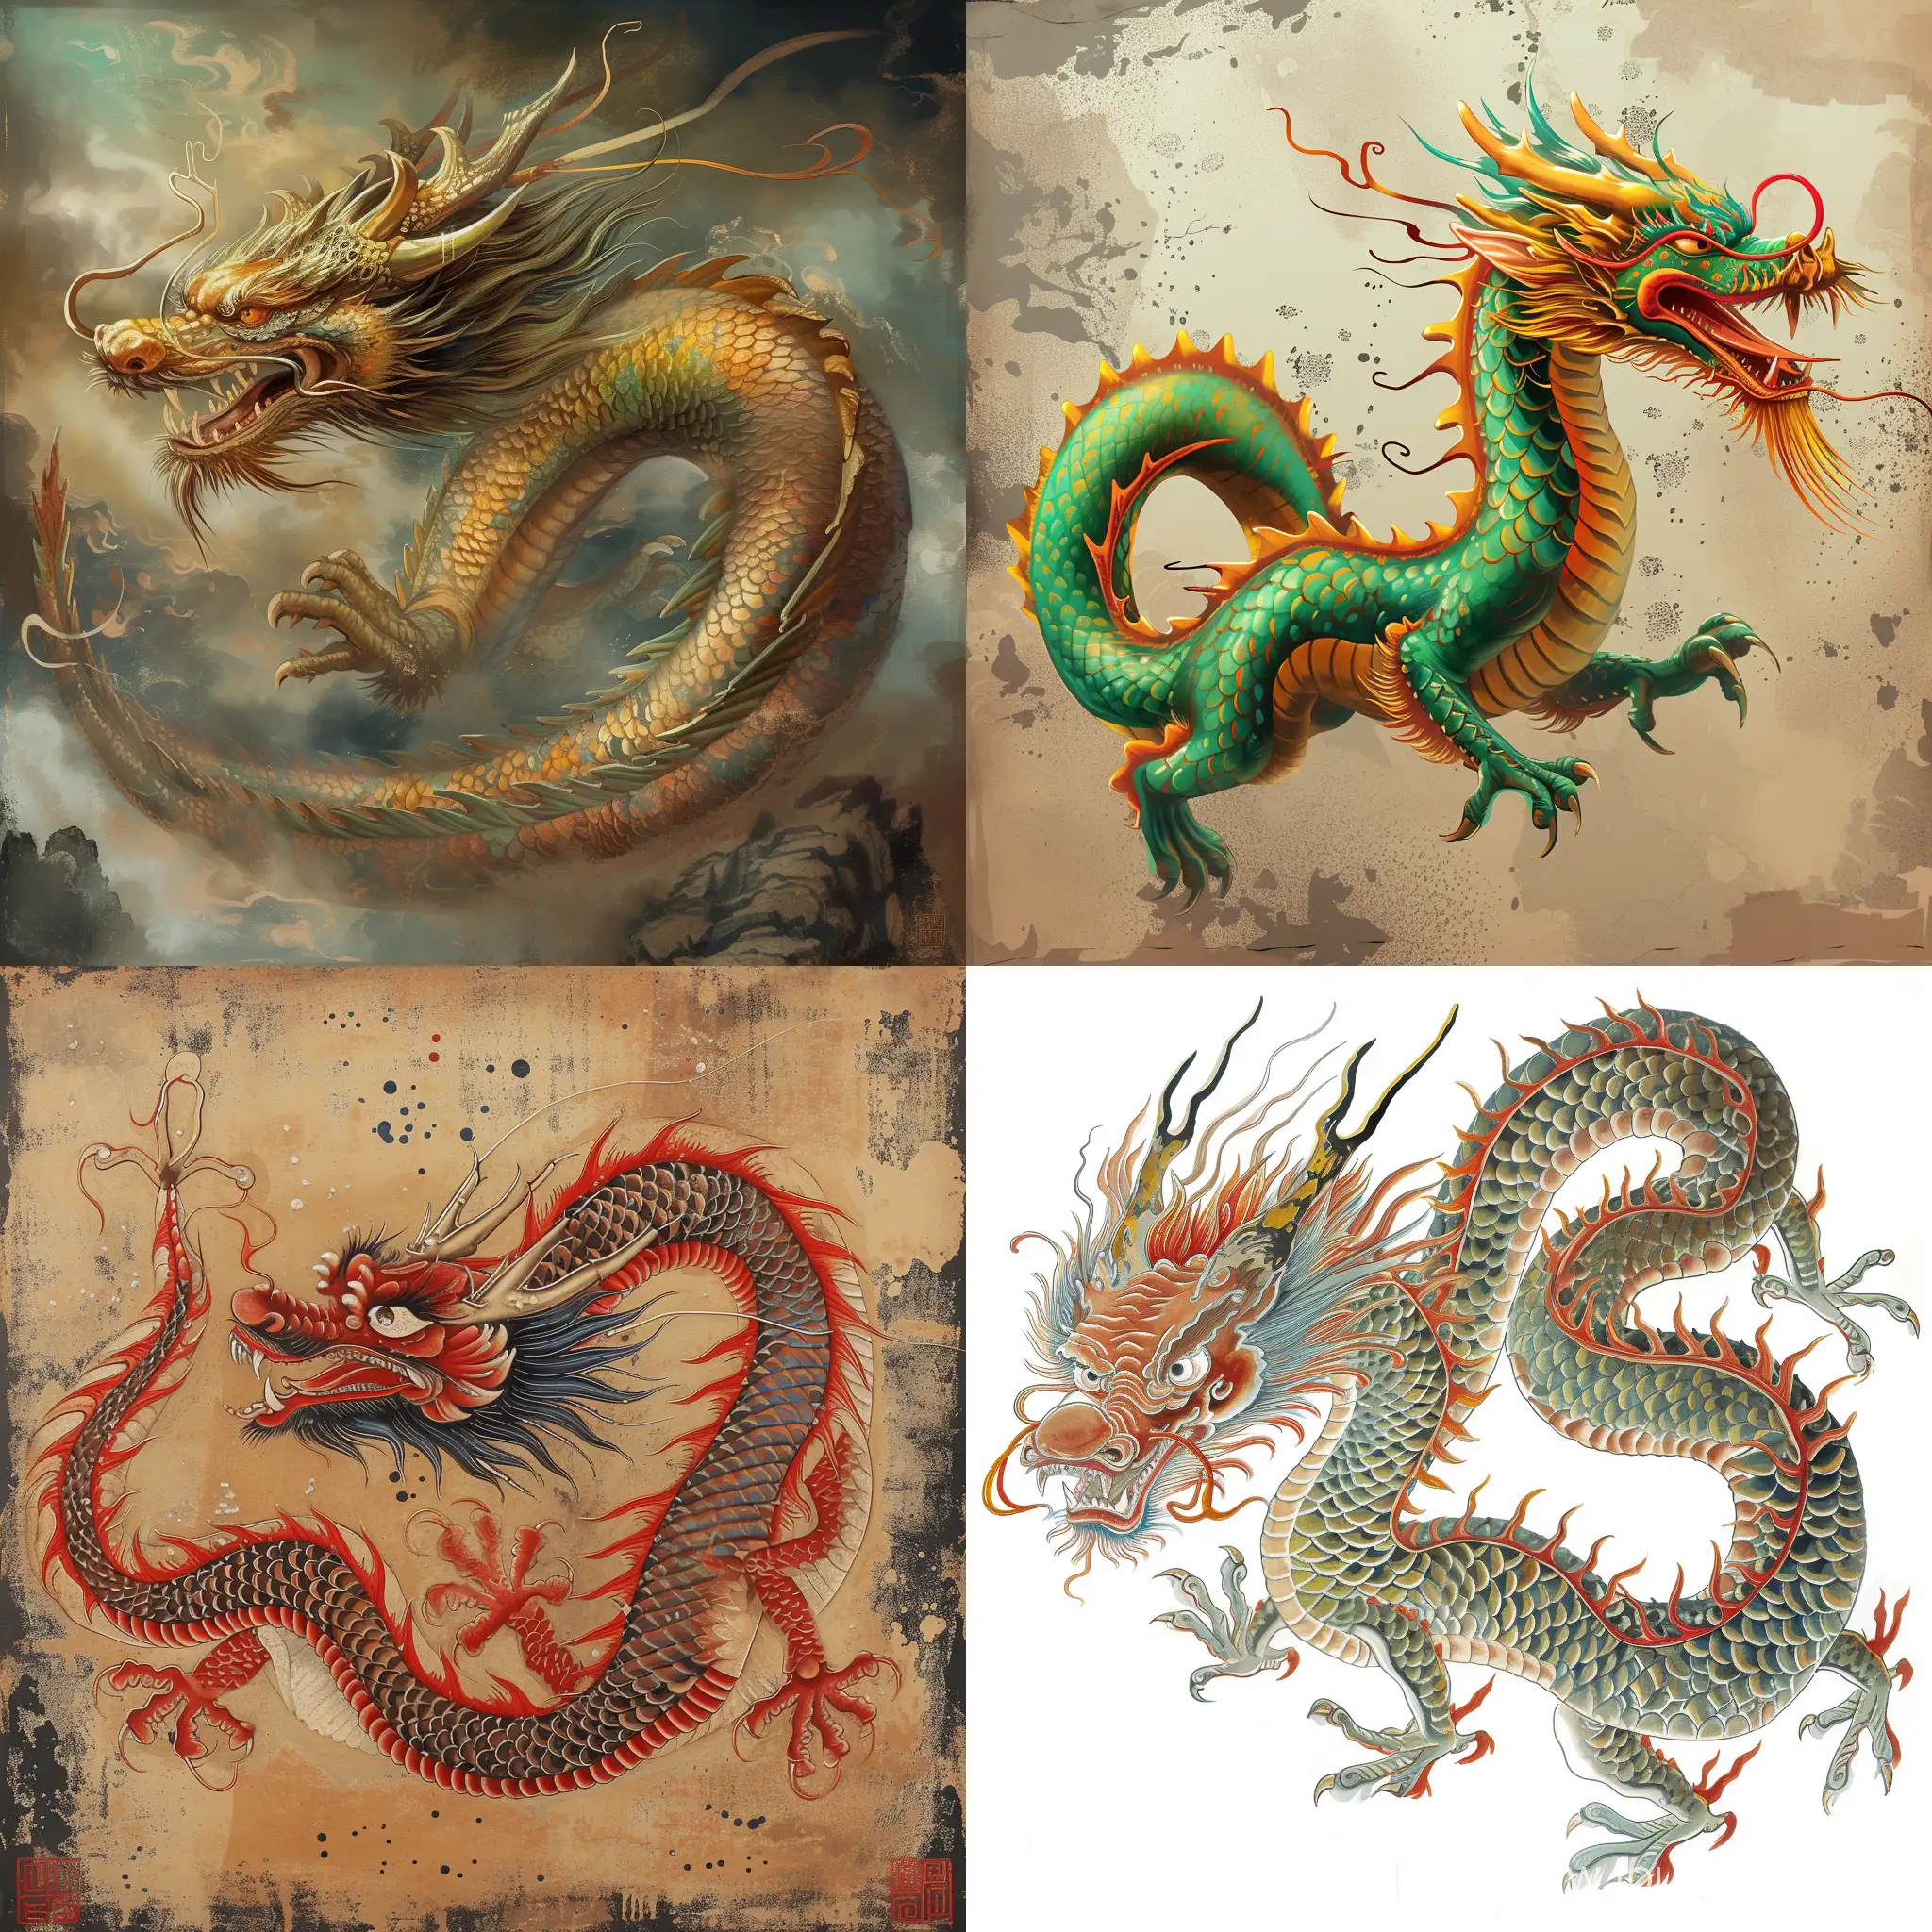 Majestic-Chinese-Dragon-Art-with-Vibrant-Colors-and-Intricate-Details